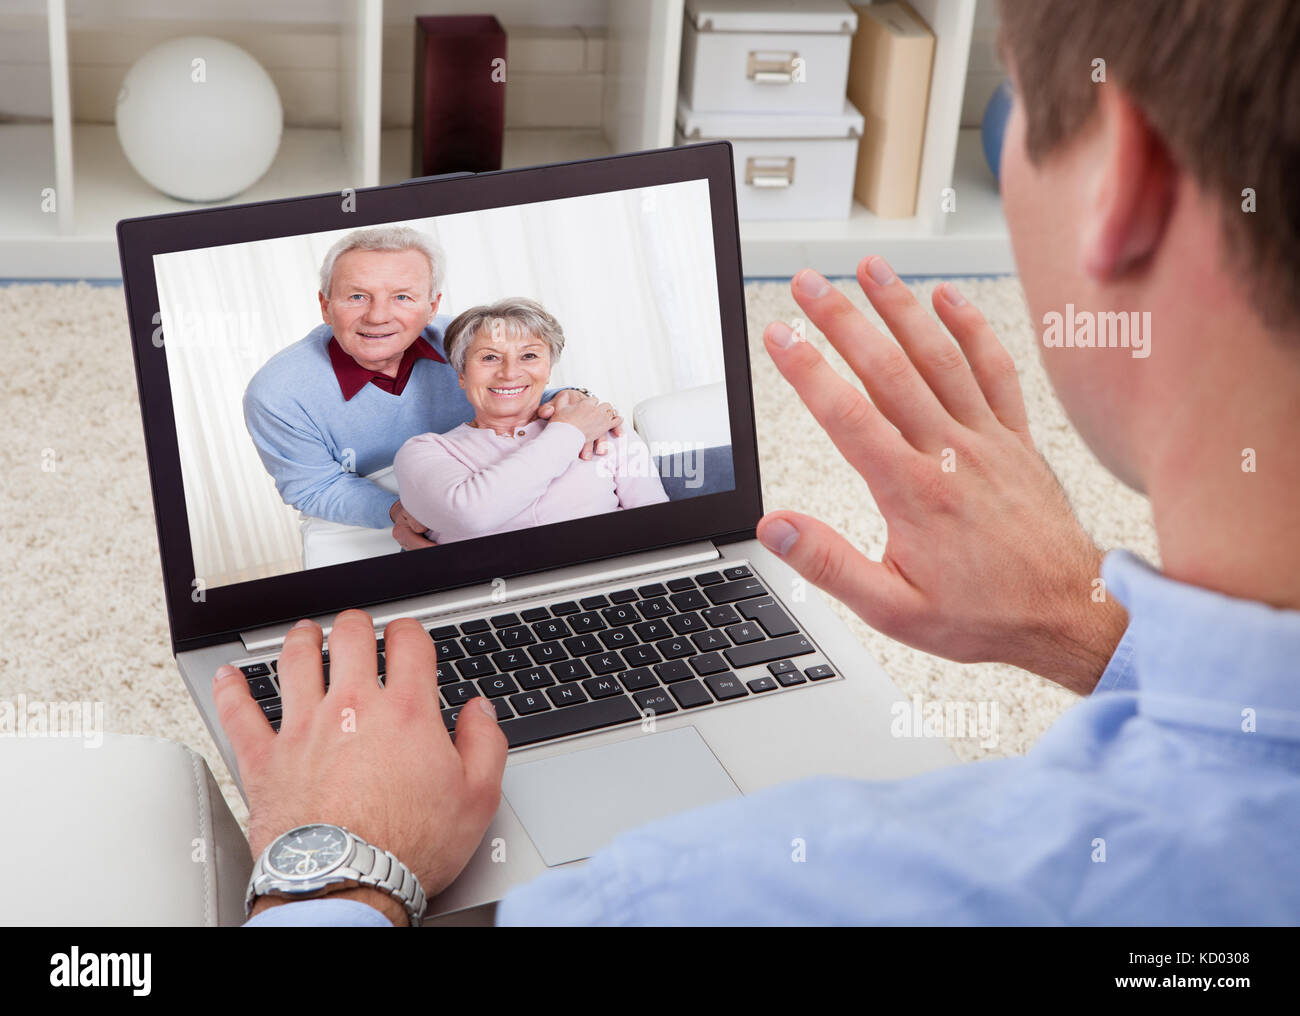 Close-up Of A Man Video Chatting On Laptop With His Parents Stock Photo